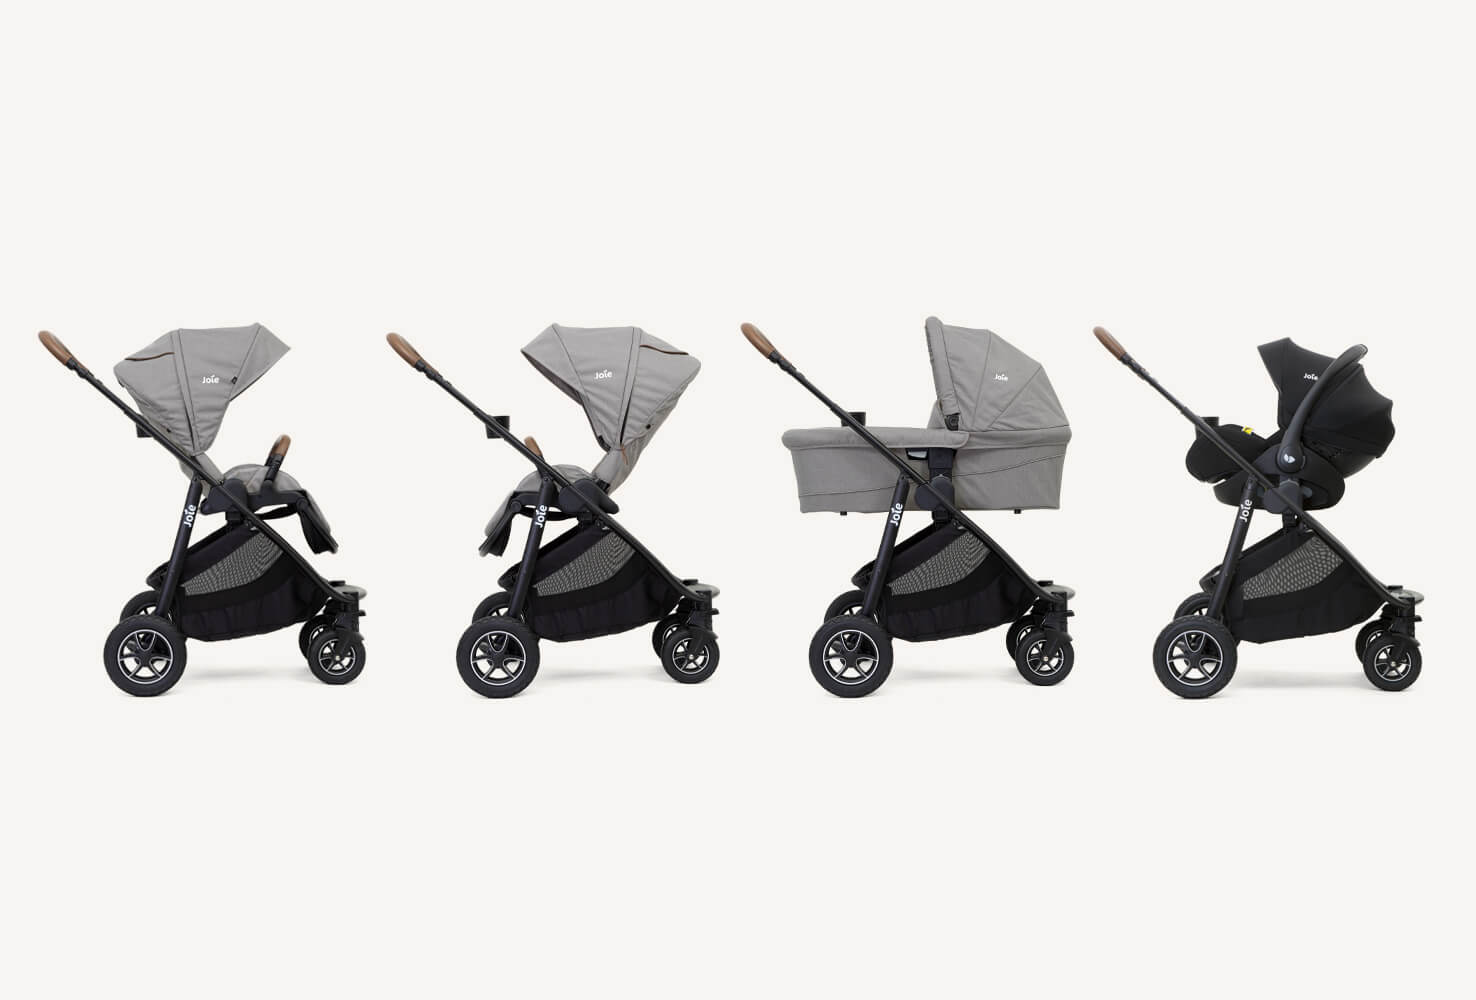  Four light gray and black Joie versatrax prams displaying the different pushchair modes.